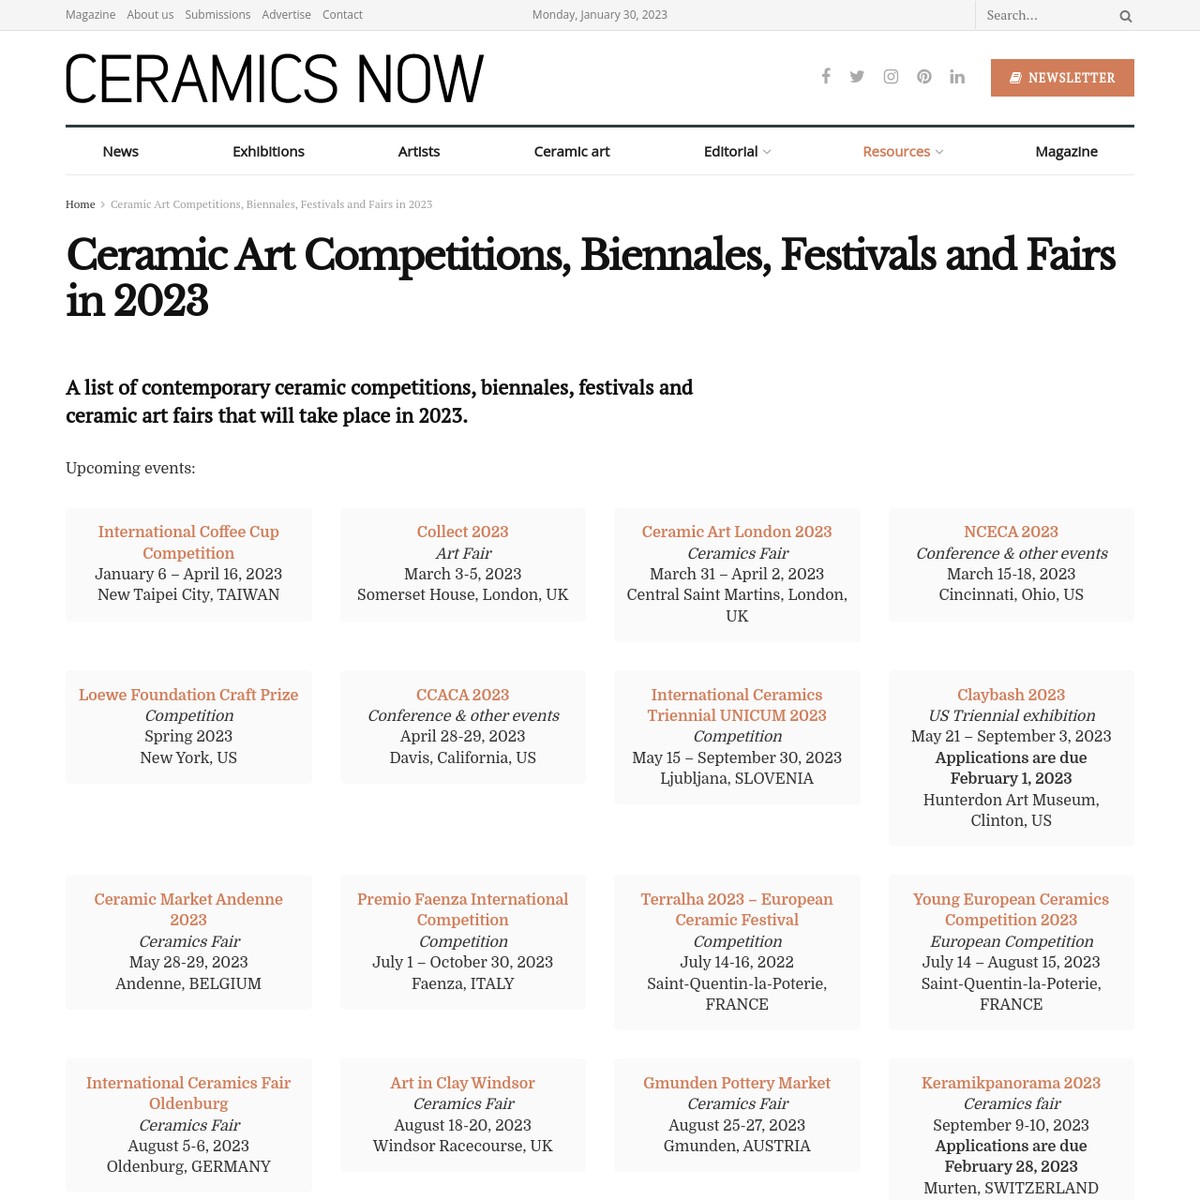 Ceramic Art Competitions, Biennales, Festivals and Fairs in 2023